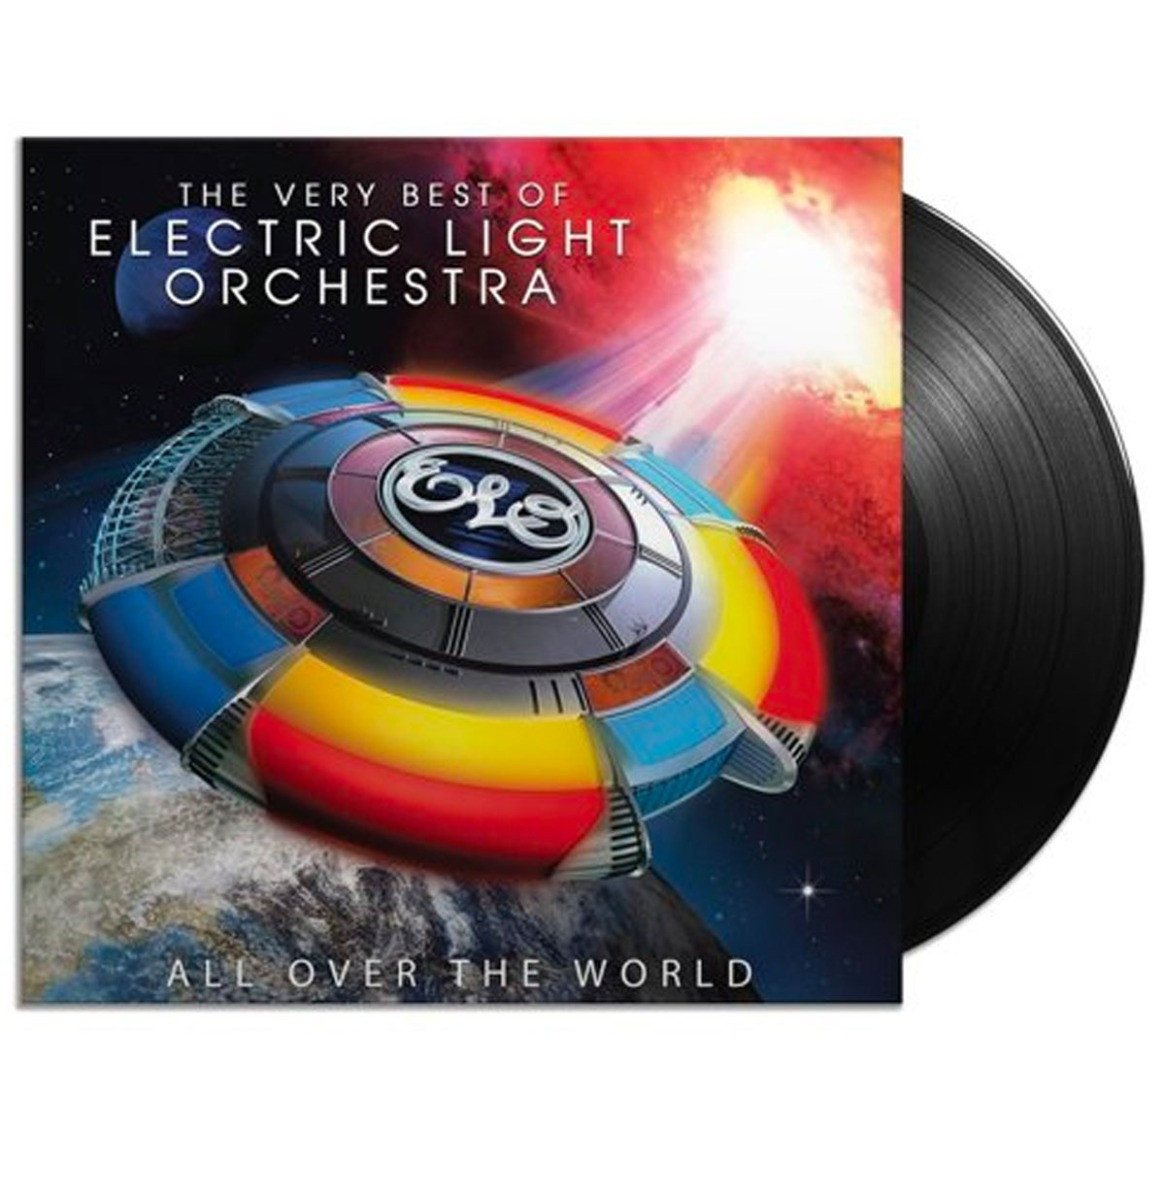 The Very Best Of Electric Light Orchestra - All Over The World LP